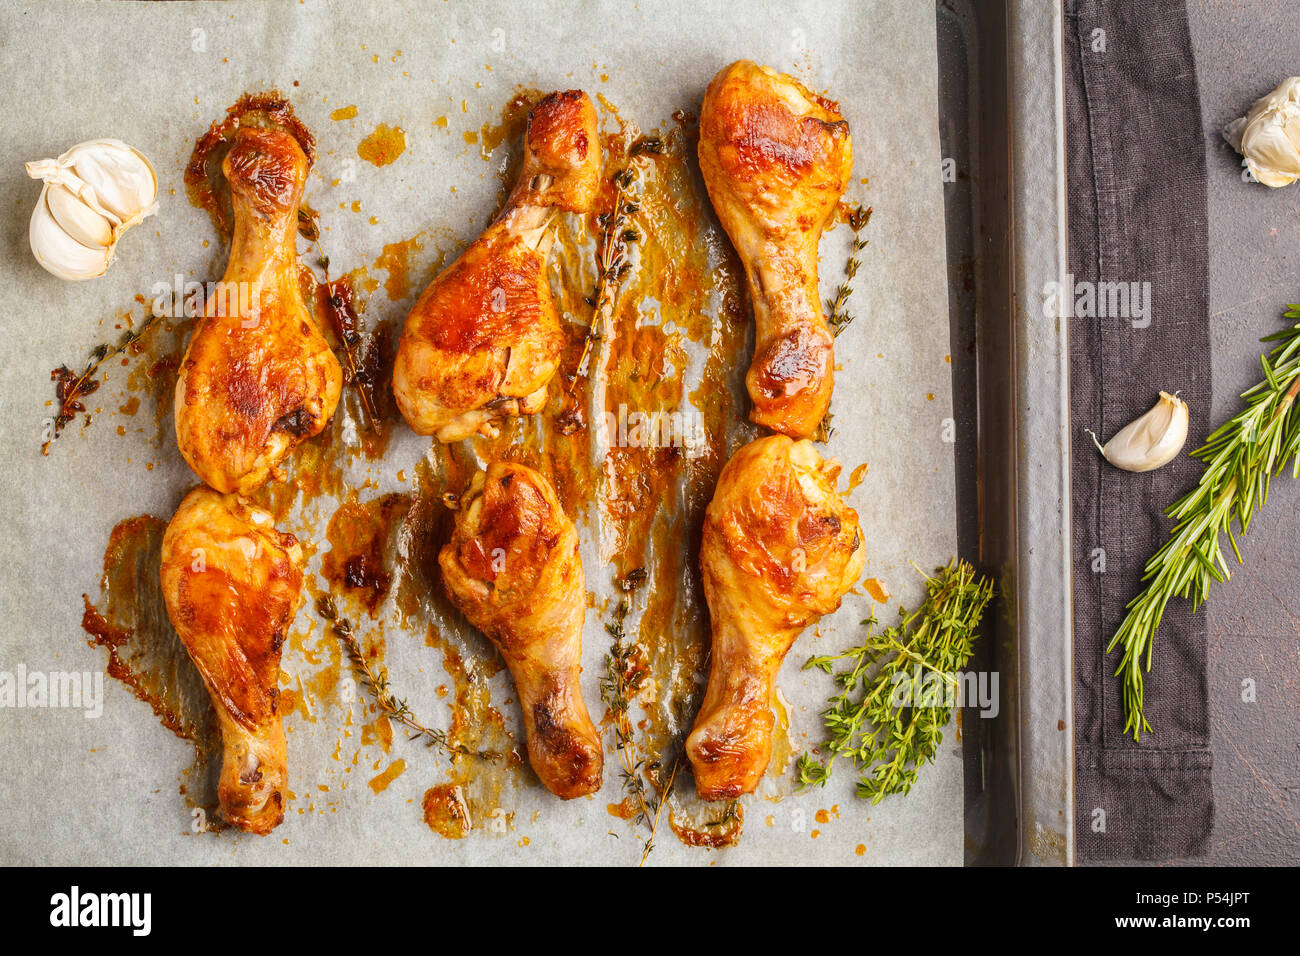 Grilled spicy chicken legs baked with garlic, rosemary and thyme on the pan. Top view Stock Photo